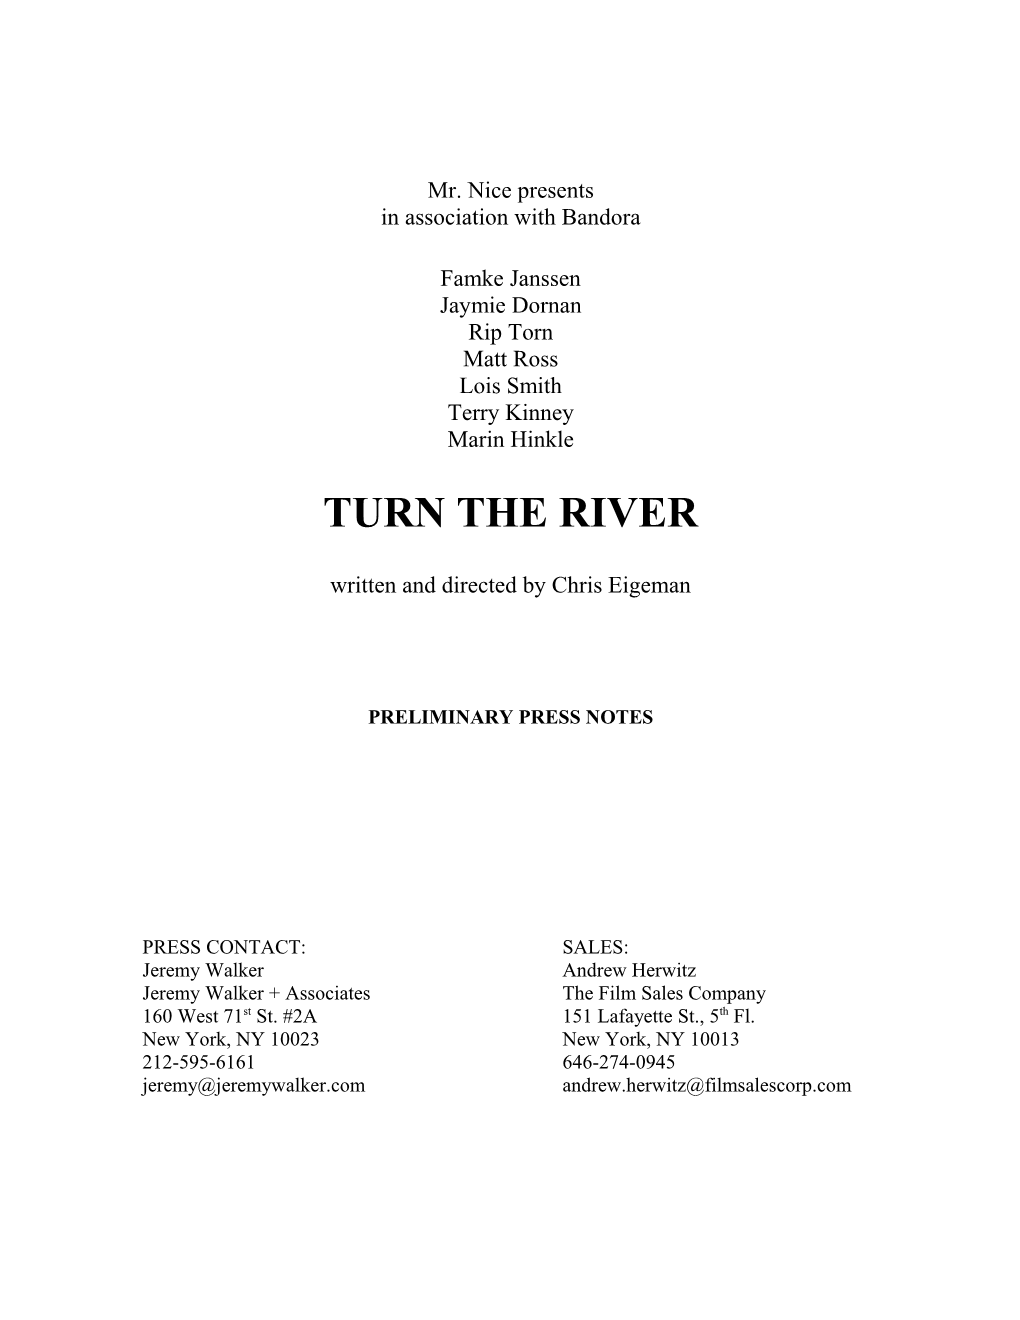 At Its Heart, Turn the River Is a Deeply Romantic Movie ( Romantic in the Sense on Shane